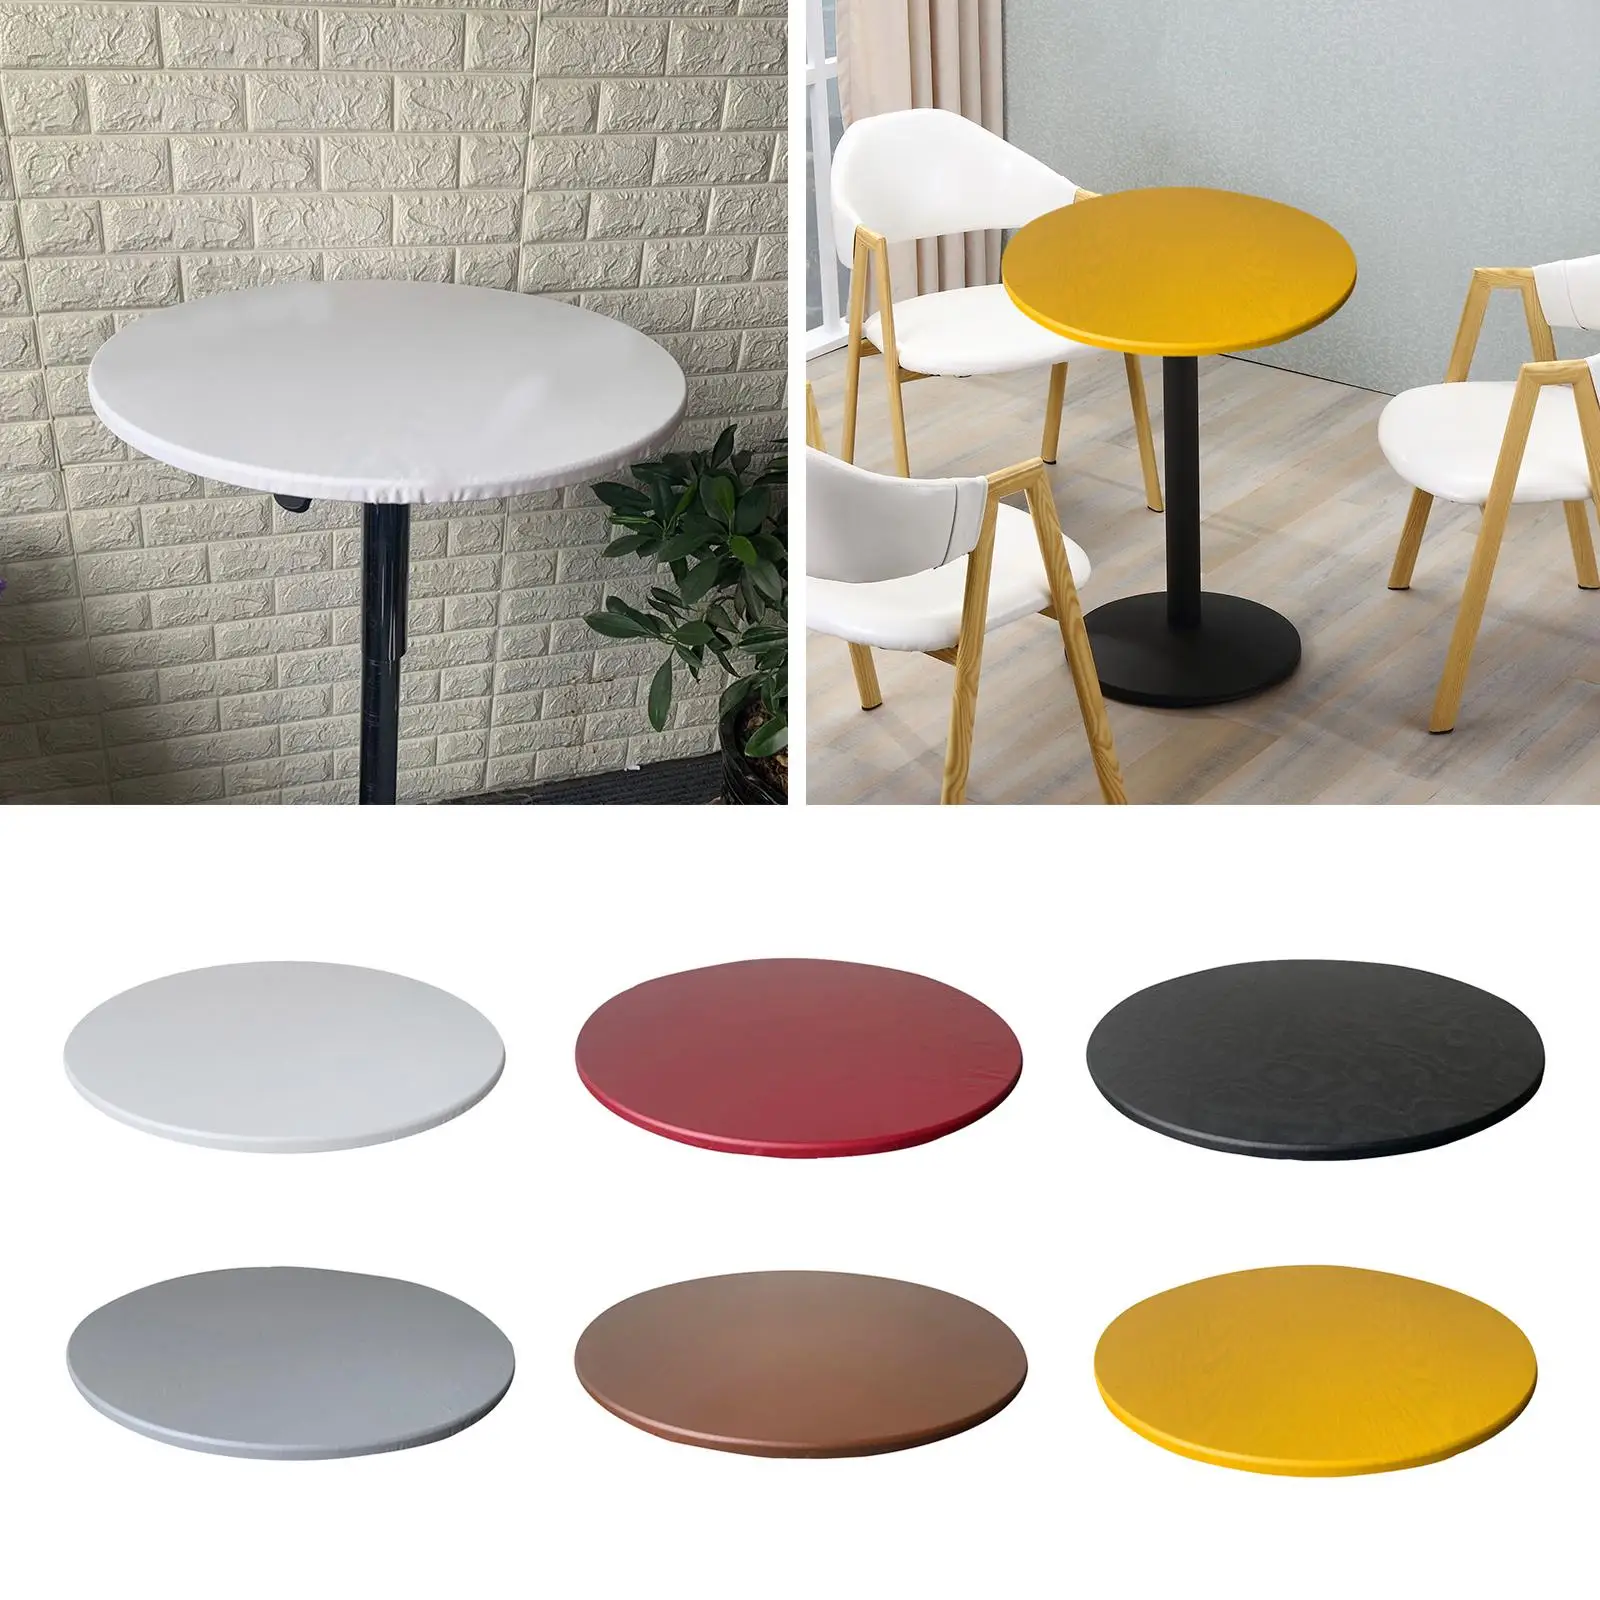 Elastic Round Table Cloth Protector Waterproof Table Cover Backed Vinyl